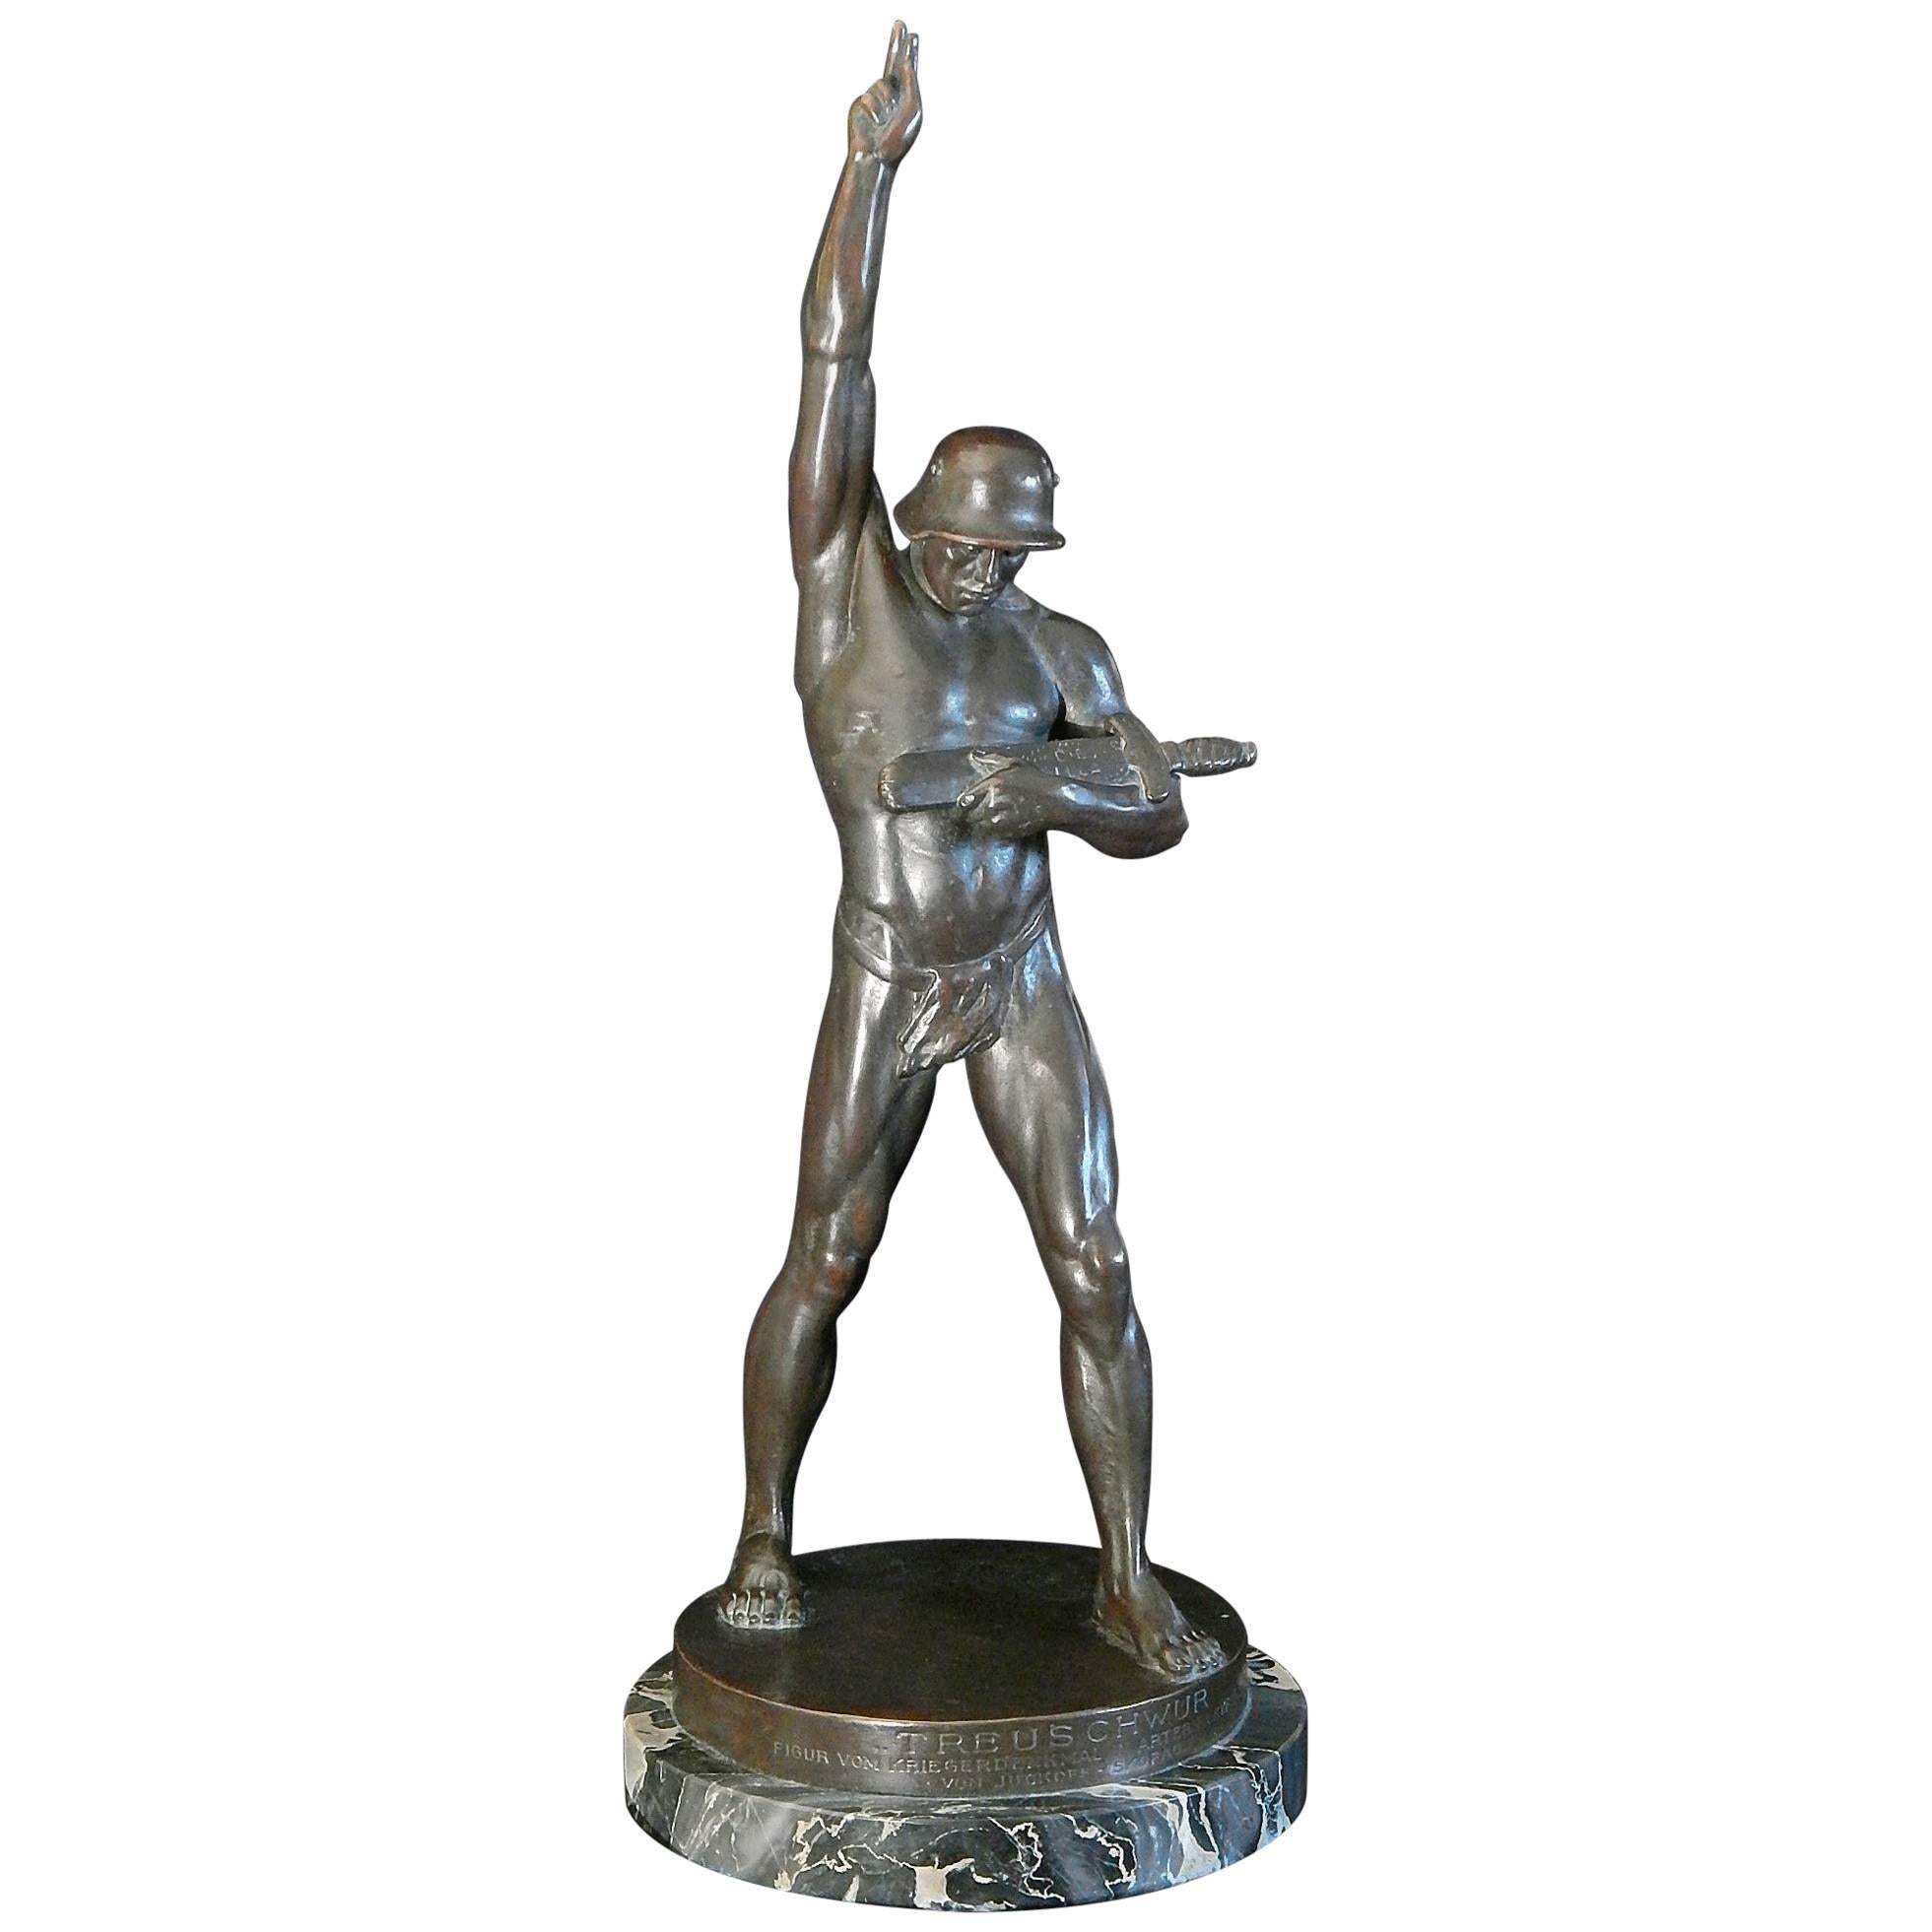 "Oath of Loyalty, " Weimar Republic Sculpture of Nude Soldier, Very Rare, 1925